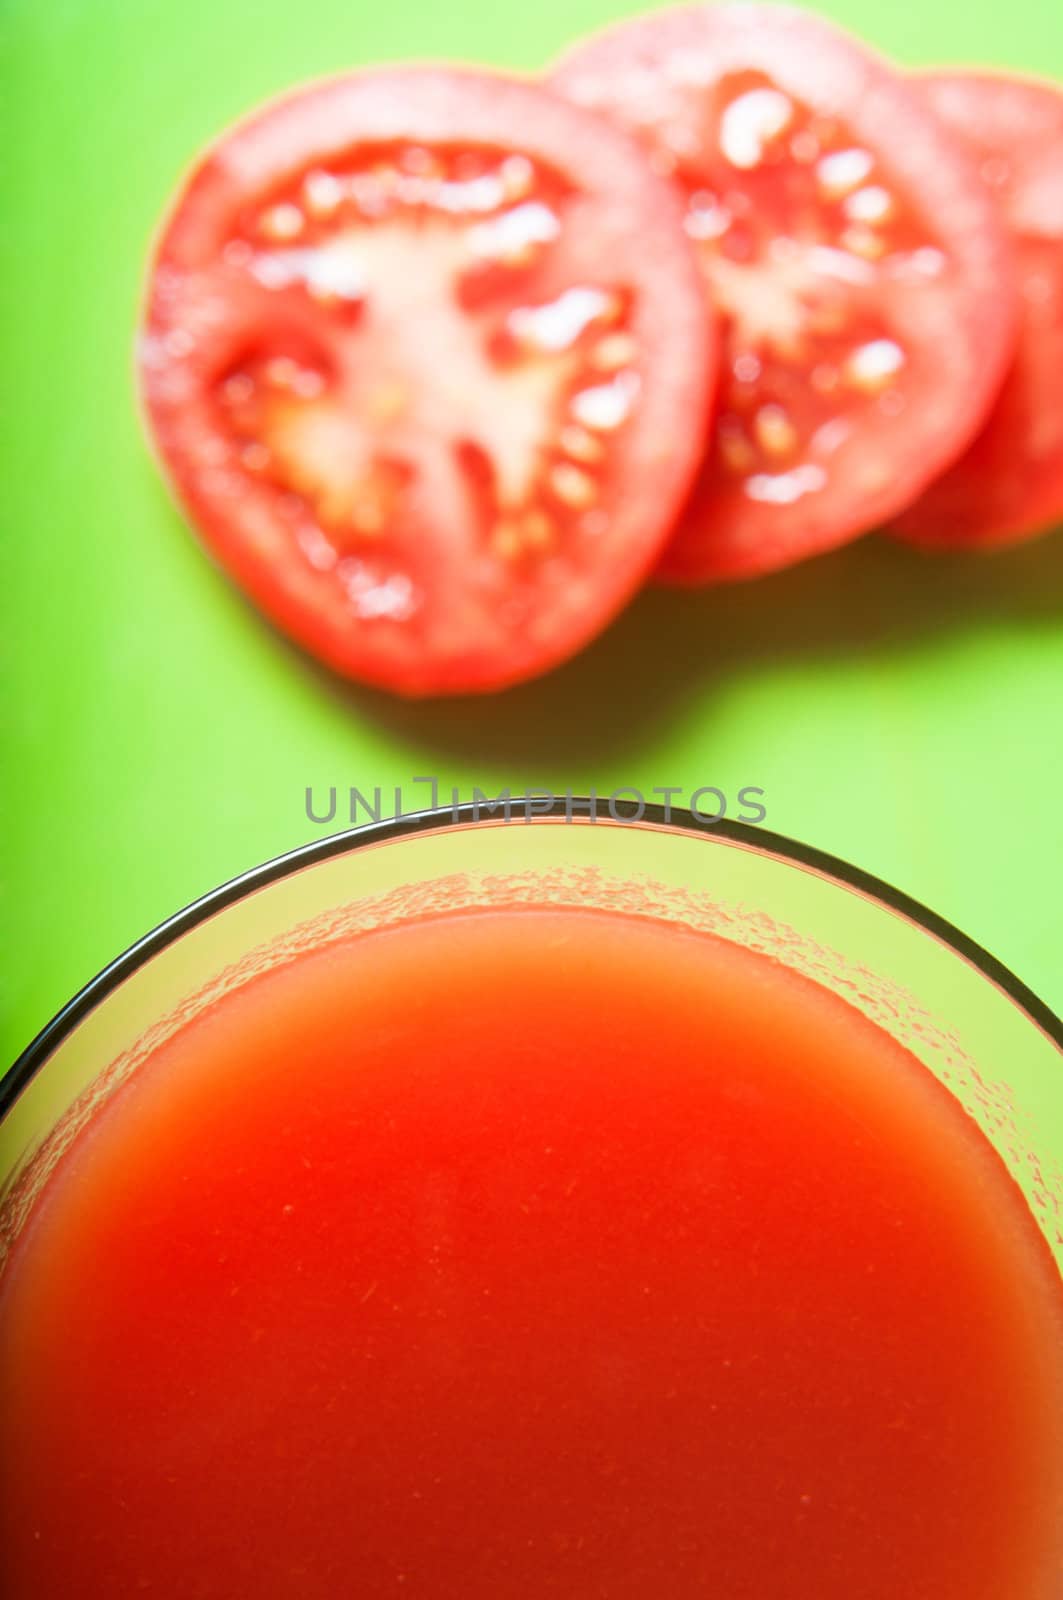 Overhead close up of a glass of tomato juice with tomato slices in soft focus background on green surface.  